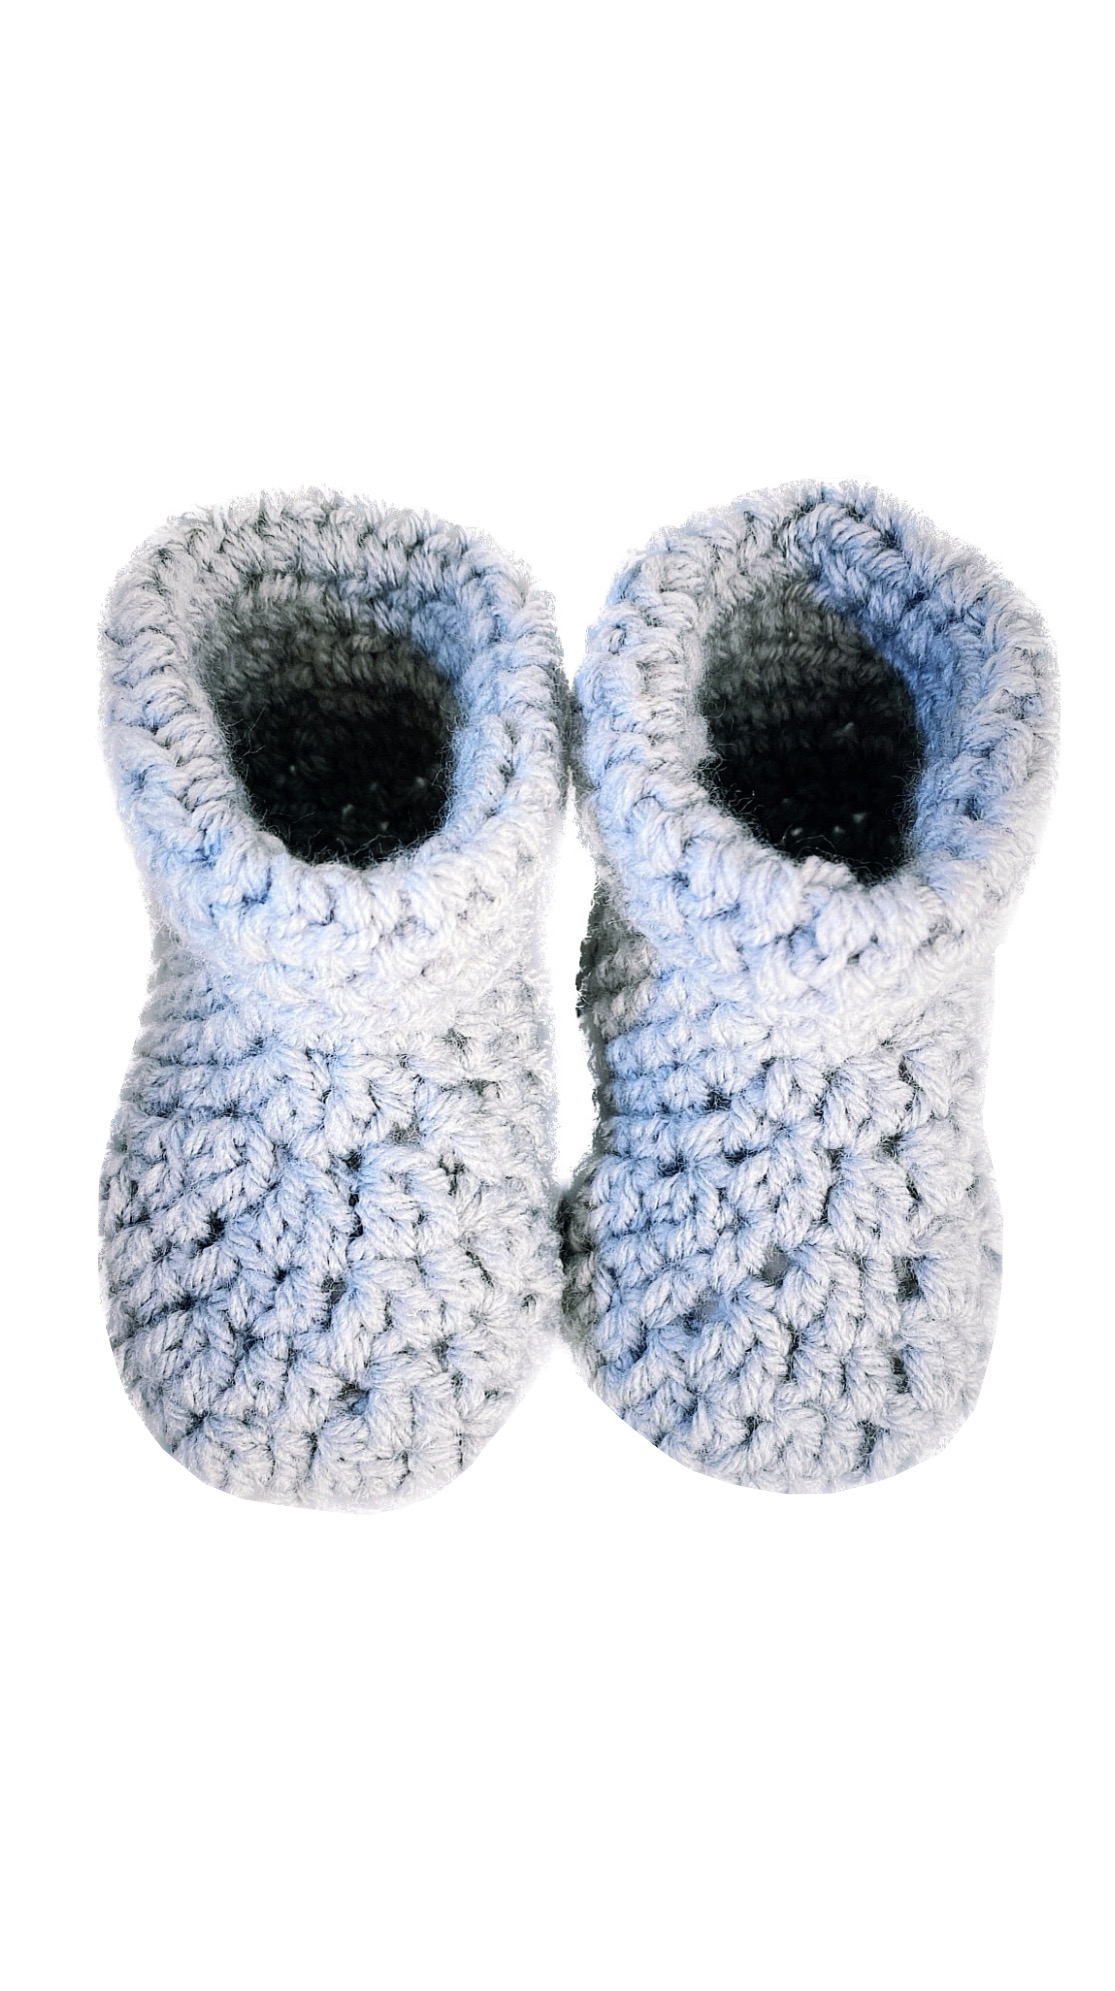 Pikkaboo Cuddles and Snuggles Crochet Baby Booties - Grey